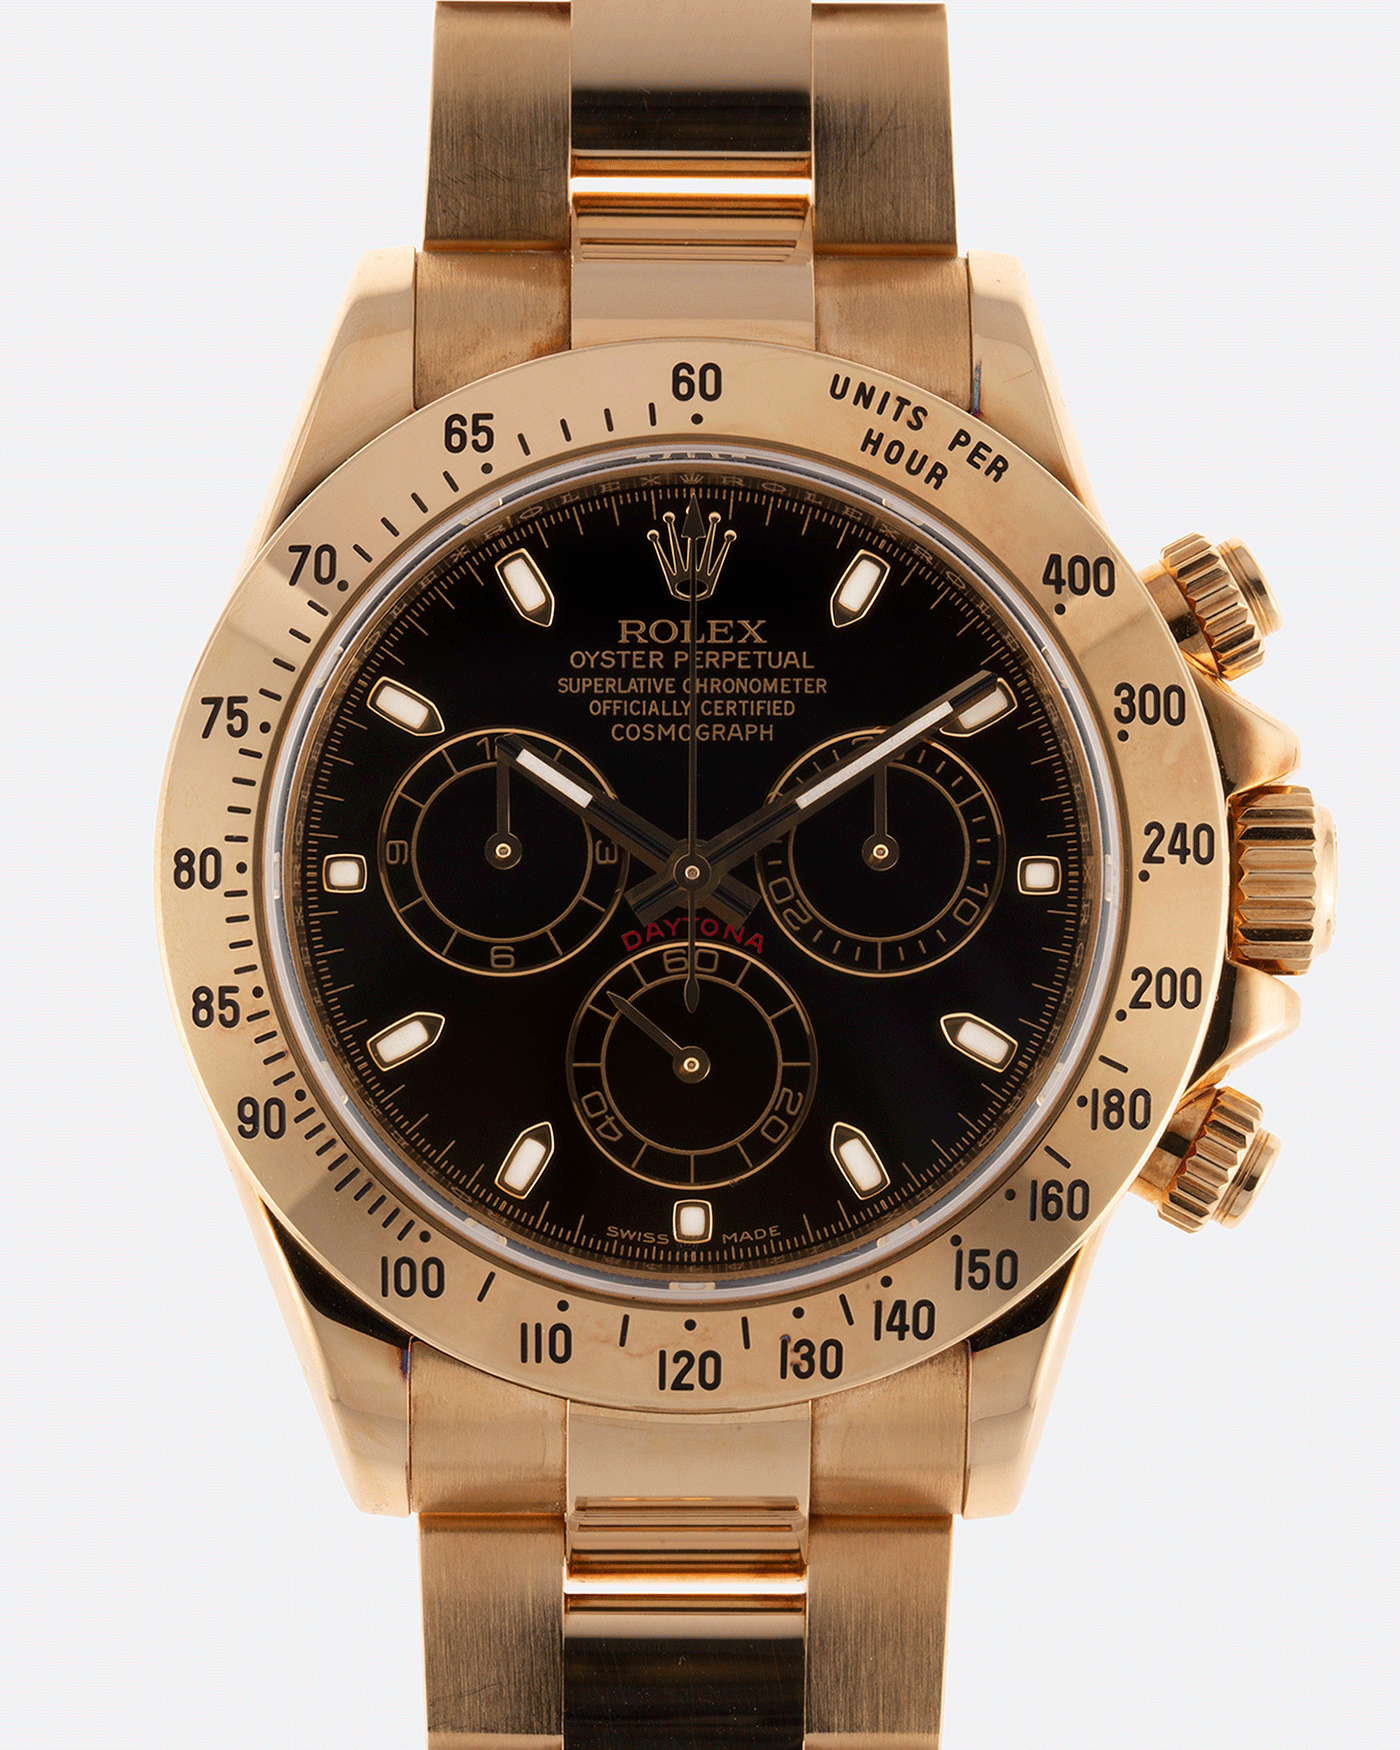 Rolex Cosmograph Daytona 116528 Yellow Chronograph Watch | S.Song Vintage Timepieces – S.Song Watches